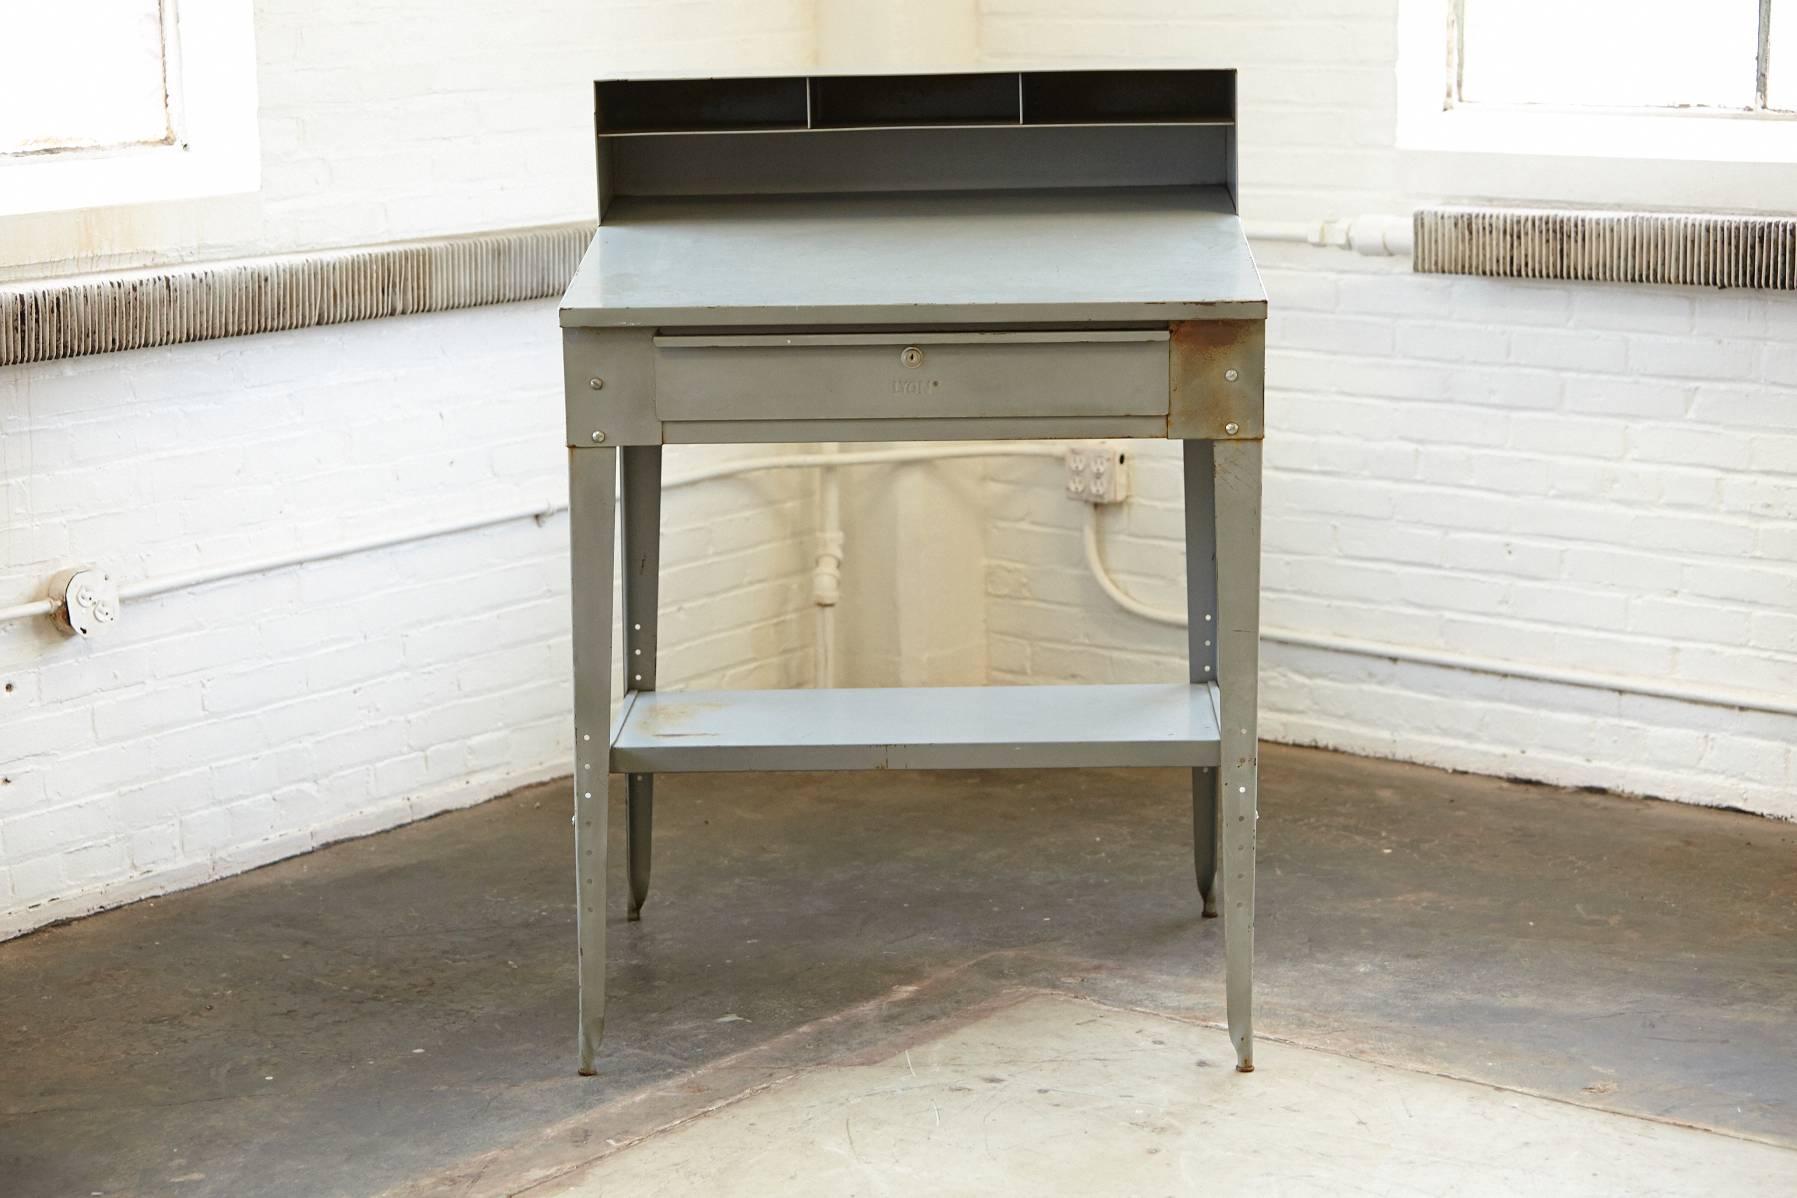 Vintage four-legged 'L' angled steel stand up factory foreman desk with original grey colored powder coat finish. The slanted tabletop has a large writing surface. Single pull out drawer with recessed handle intact. The compartmentalized riser